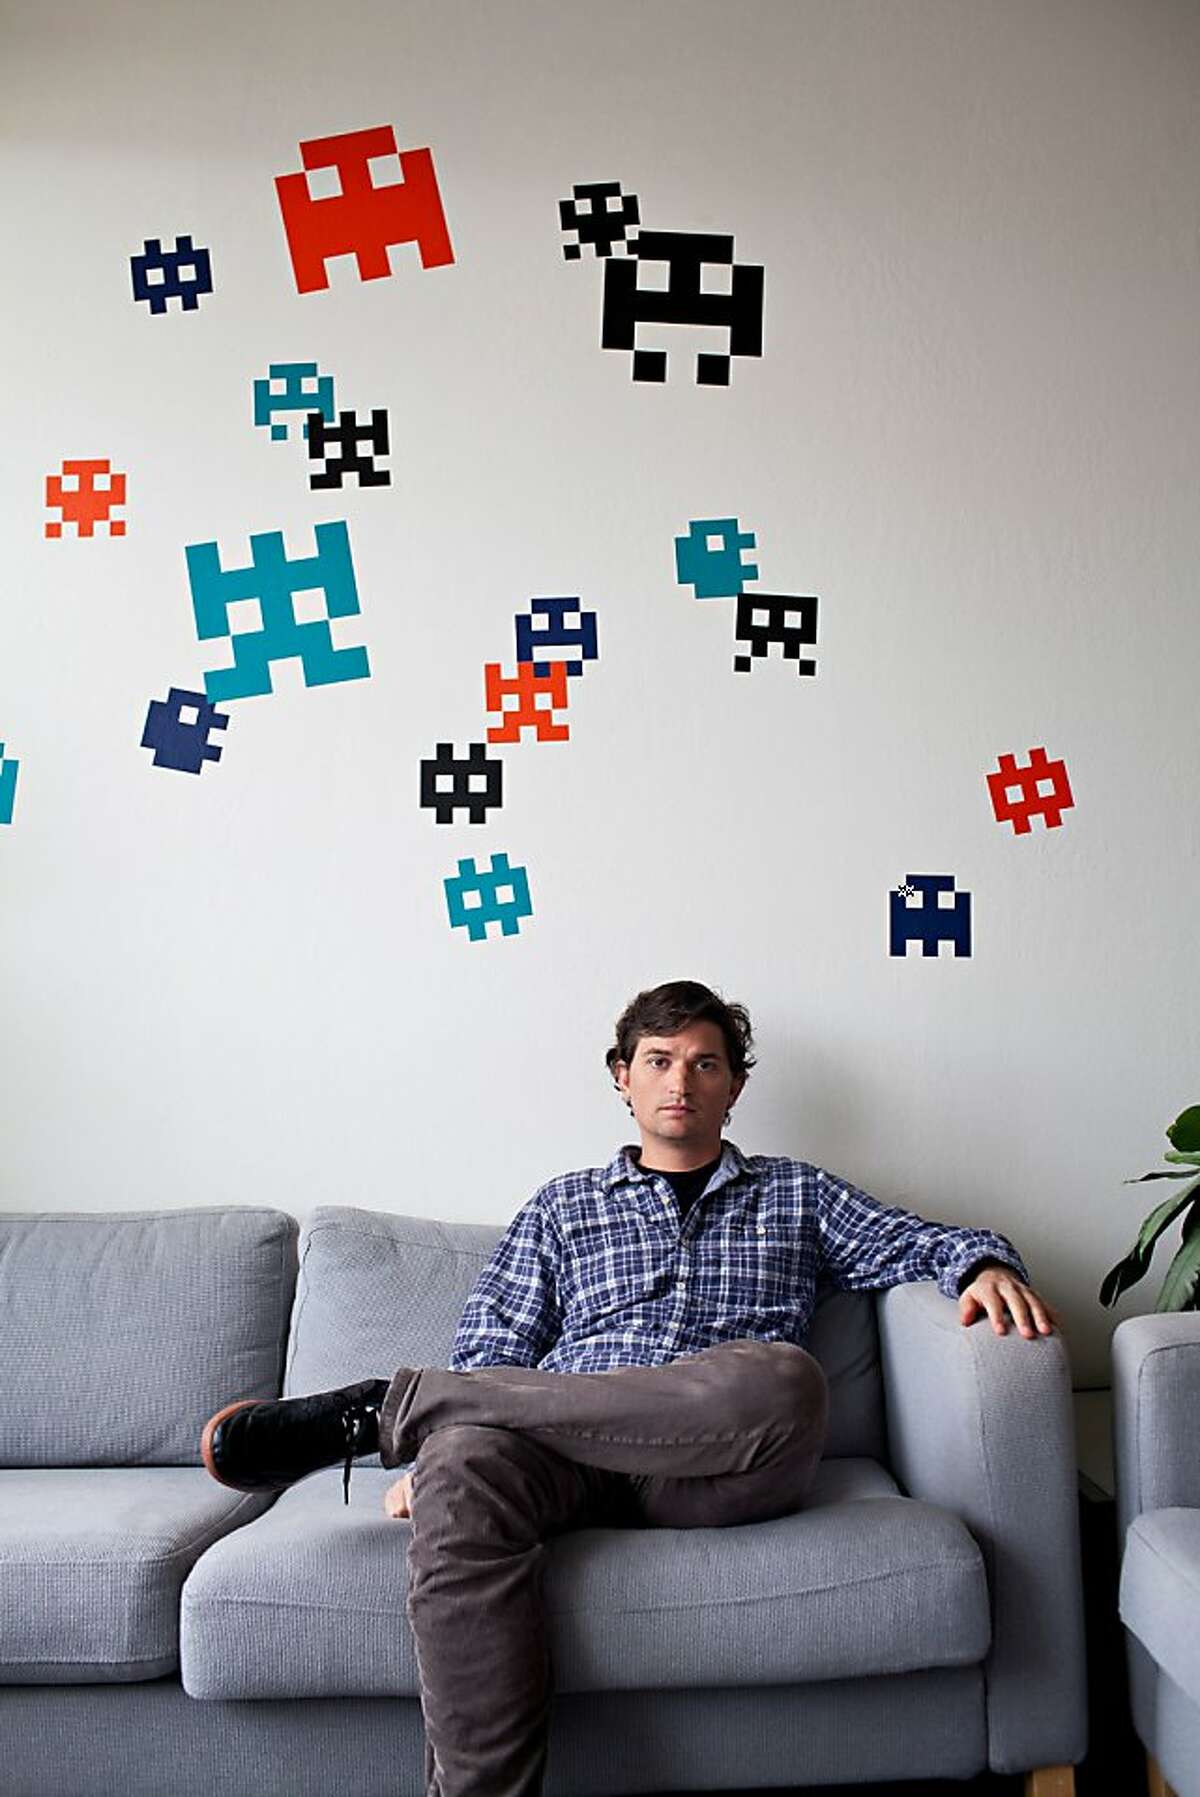 App.net founder Dalton Caldwell recently crowdsourced more than $800,000 in funding from 12,000 people in 30 days to kickstart the idea of an ad-free alternative to Twitter and Facebook. Here Caldwell at Mixed Media Labs in San Francisco, Calif., Wednesday, August 22, 2012.